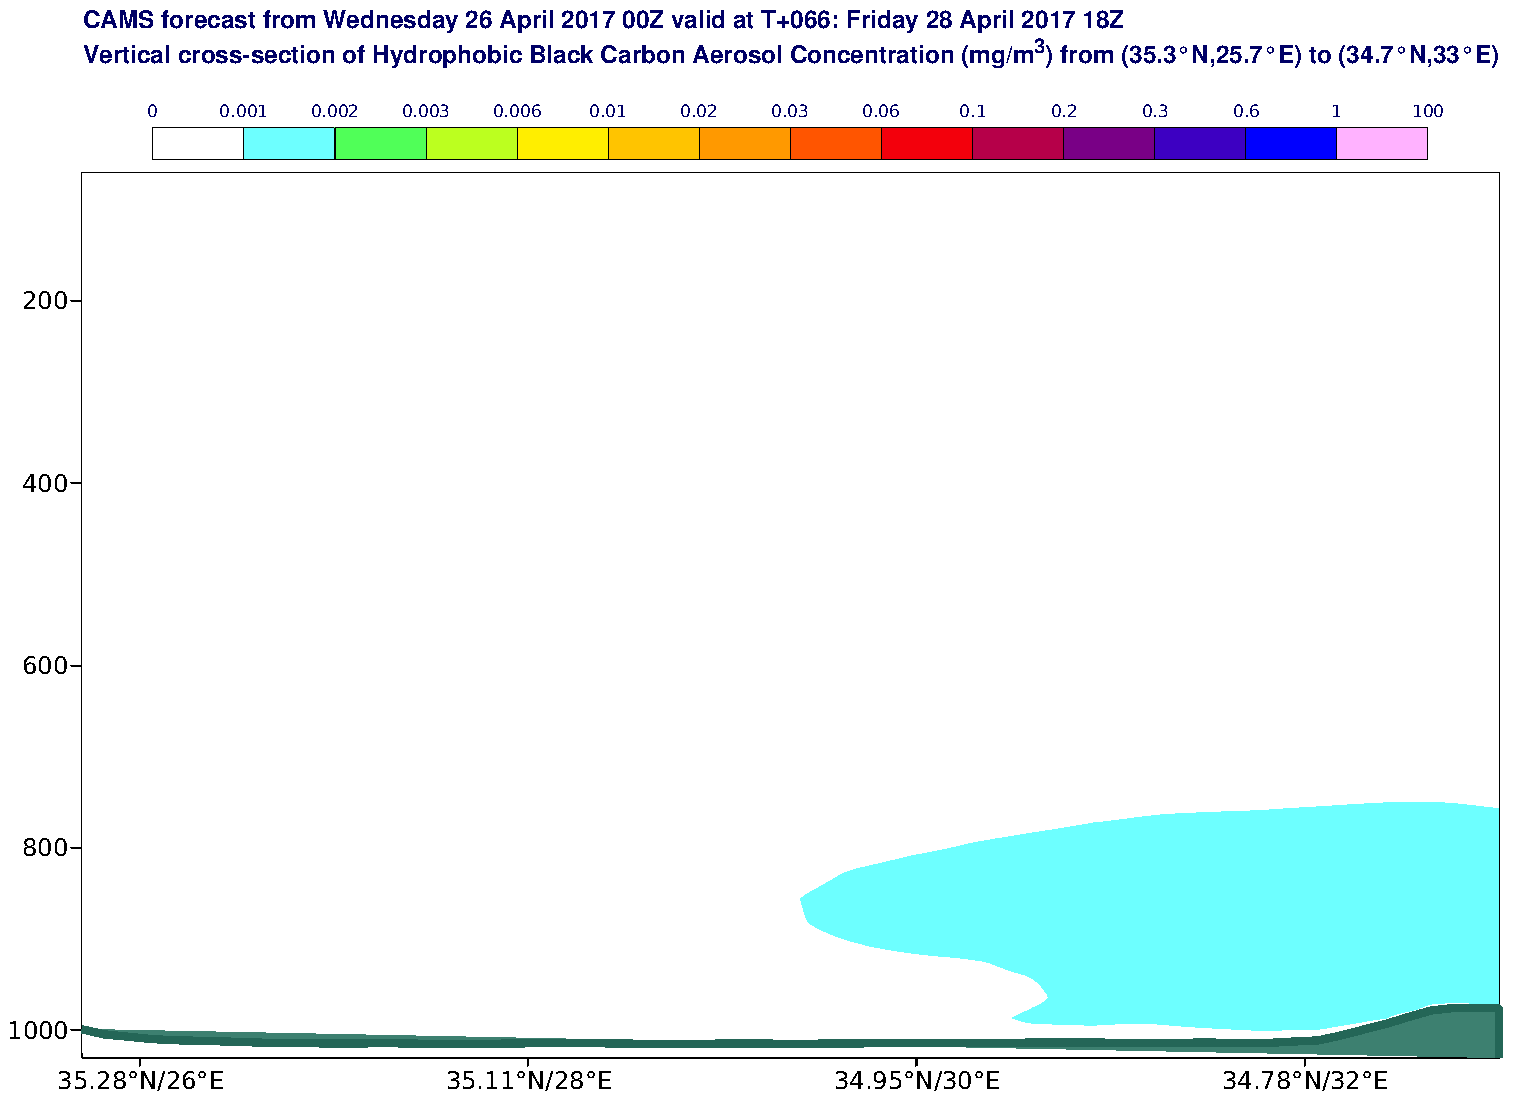 Vertical cross-section of Hydrophobic Black Carbon Aerosol Concentration (mg/m3) valid at T66 - 2017-04-28 18:00